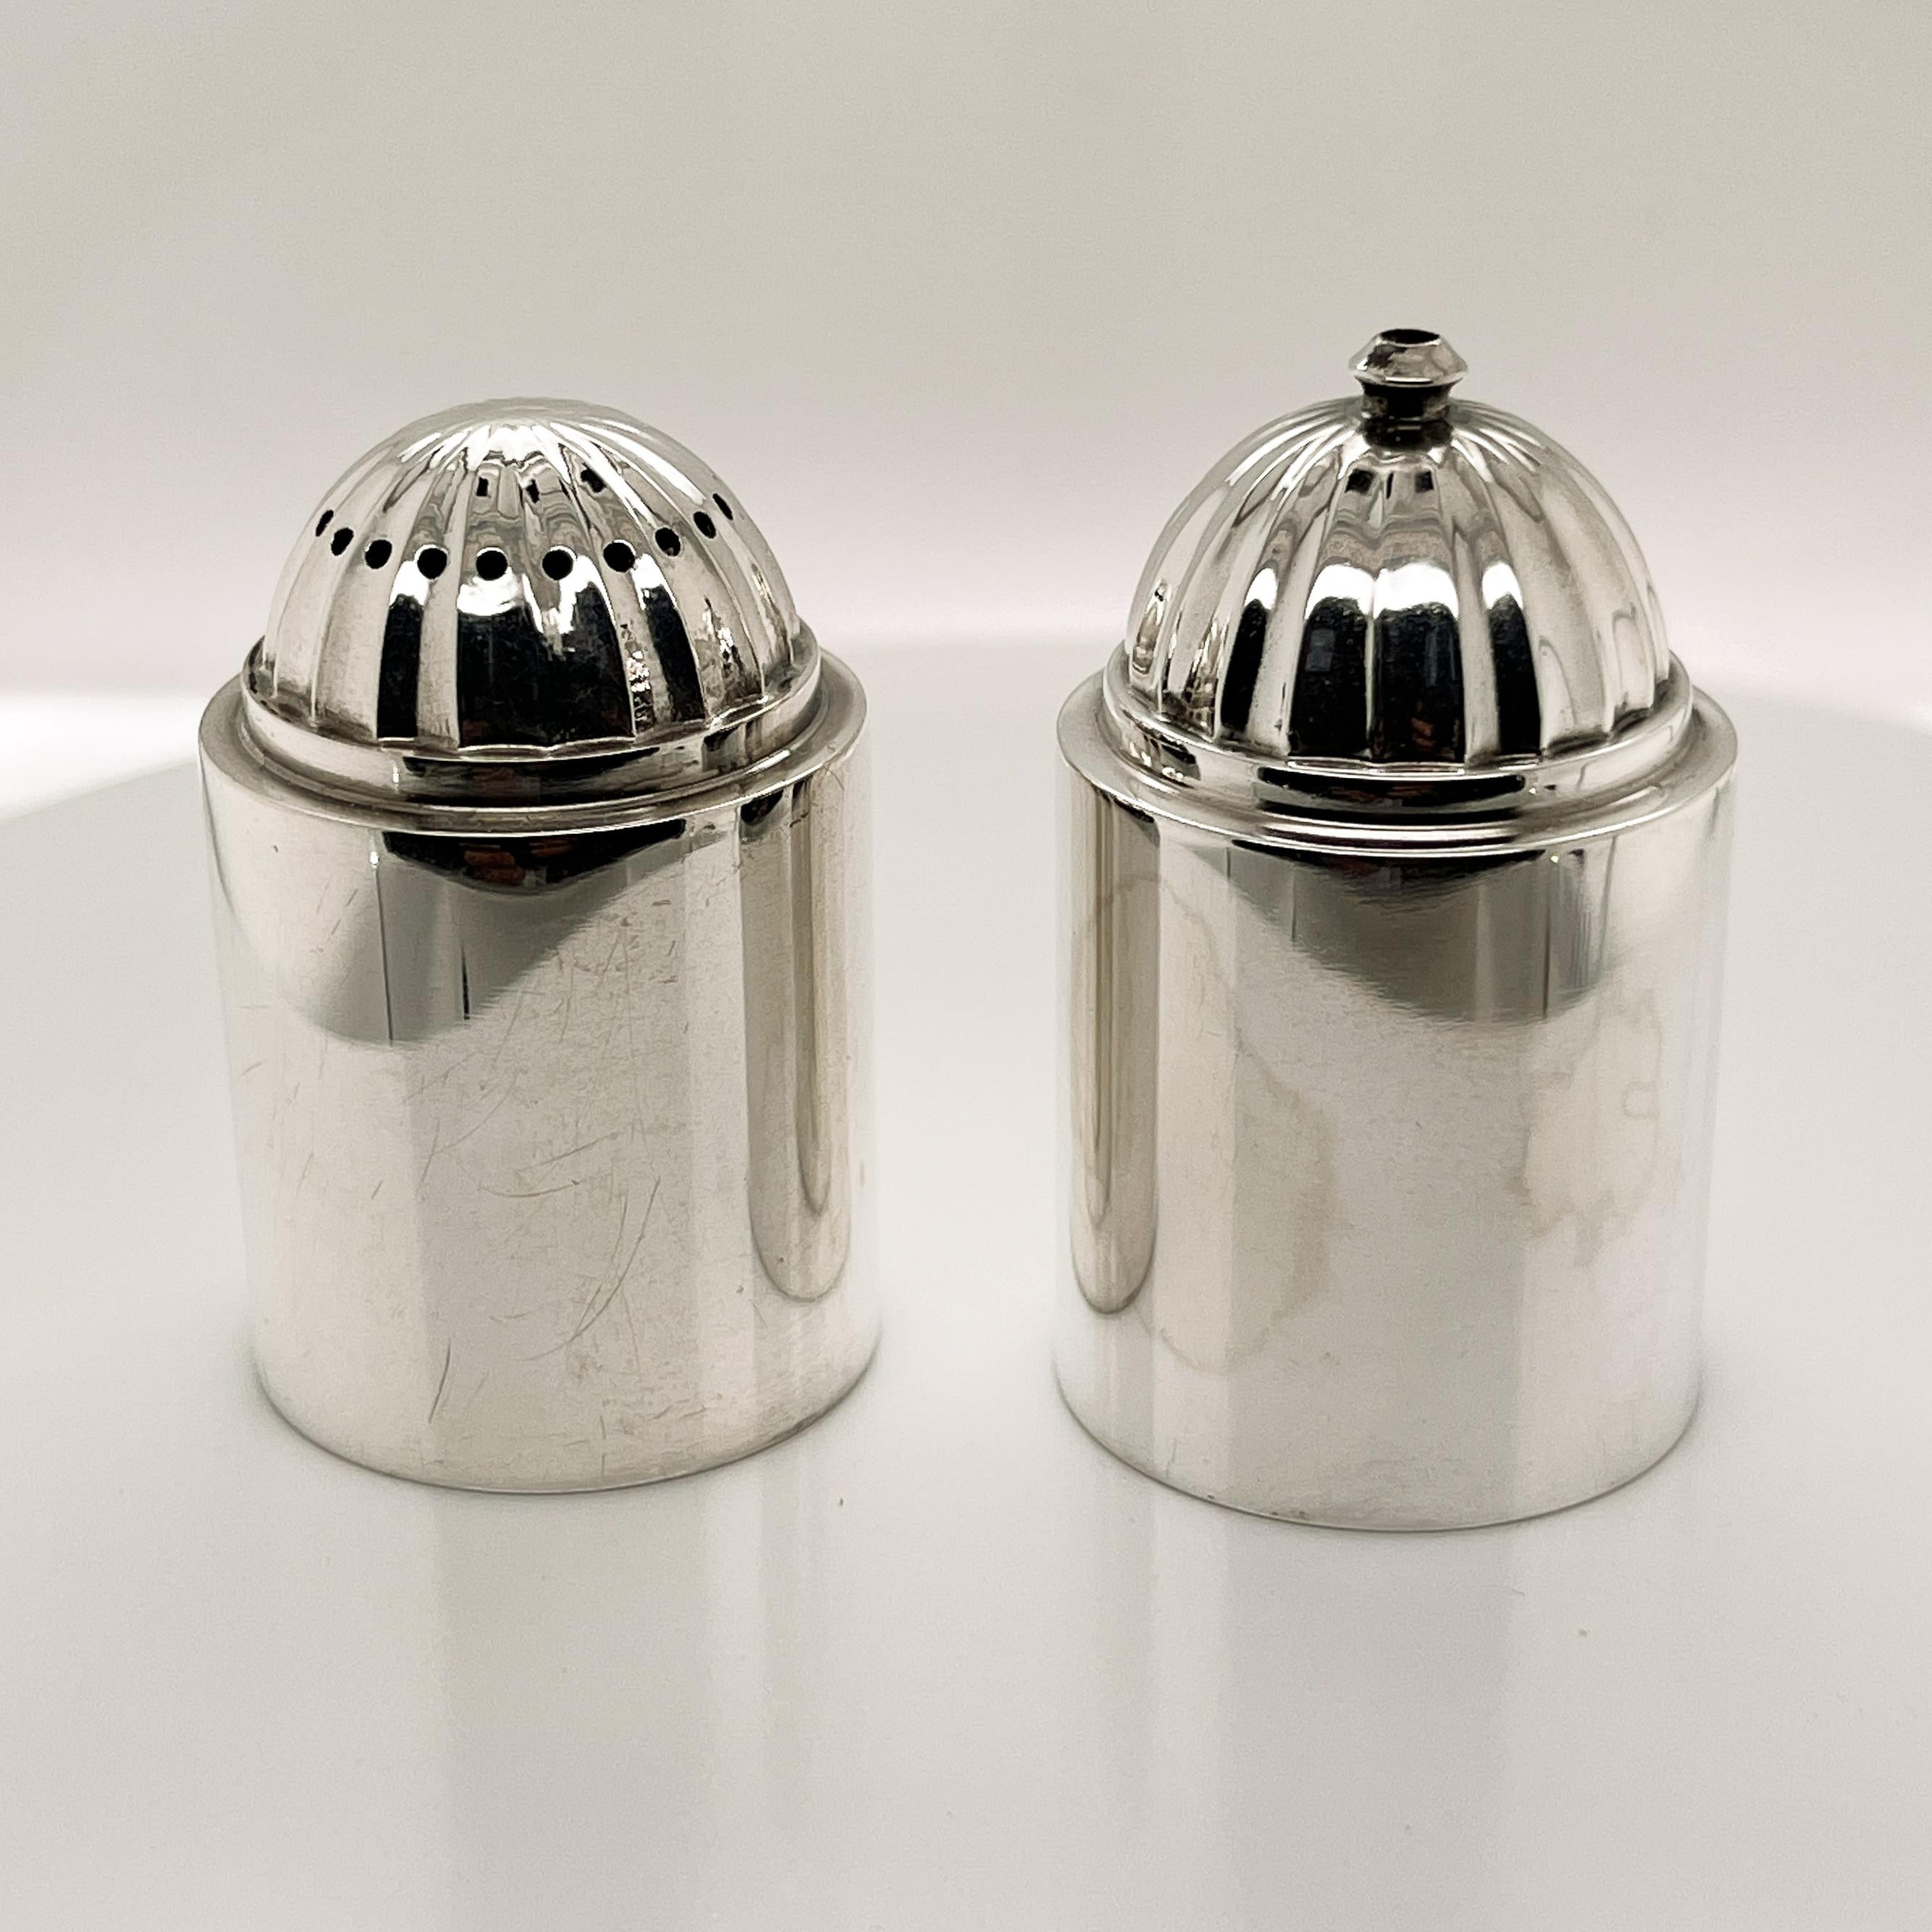 Pair of Danish Modern Georg Jensen Sterling Silver Salt and Pepper Shakers # 627 In Good Condition For Sale In Philadelphia, PA